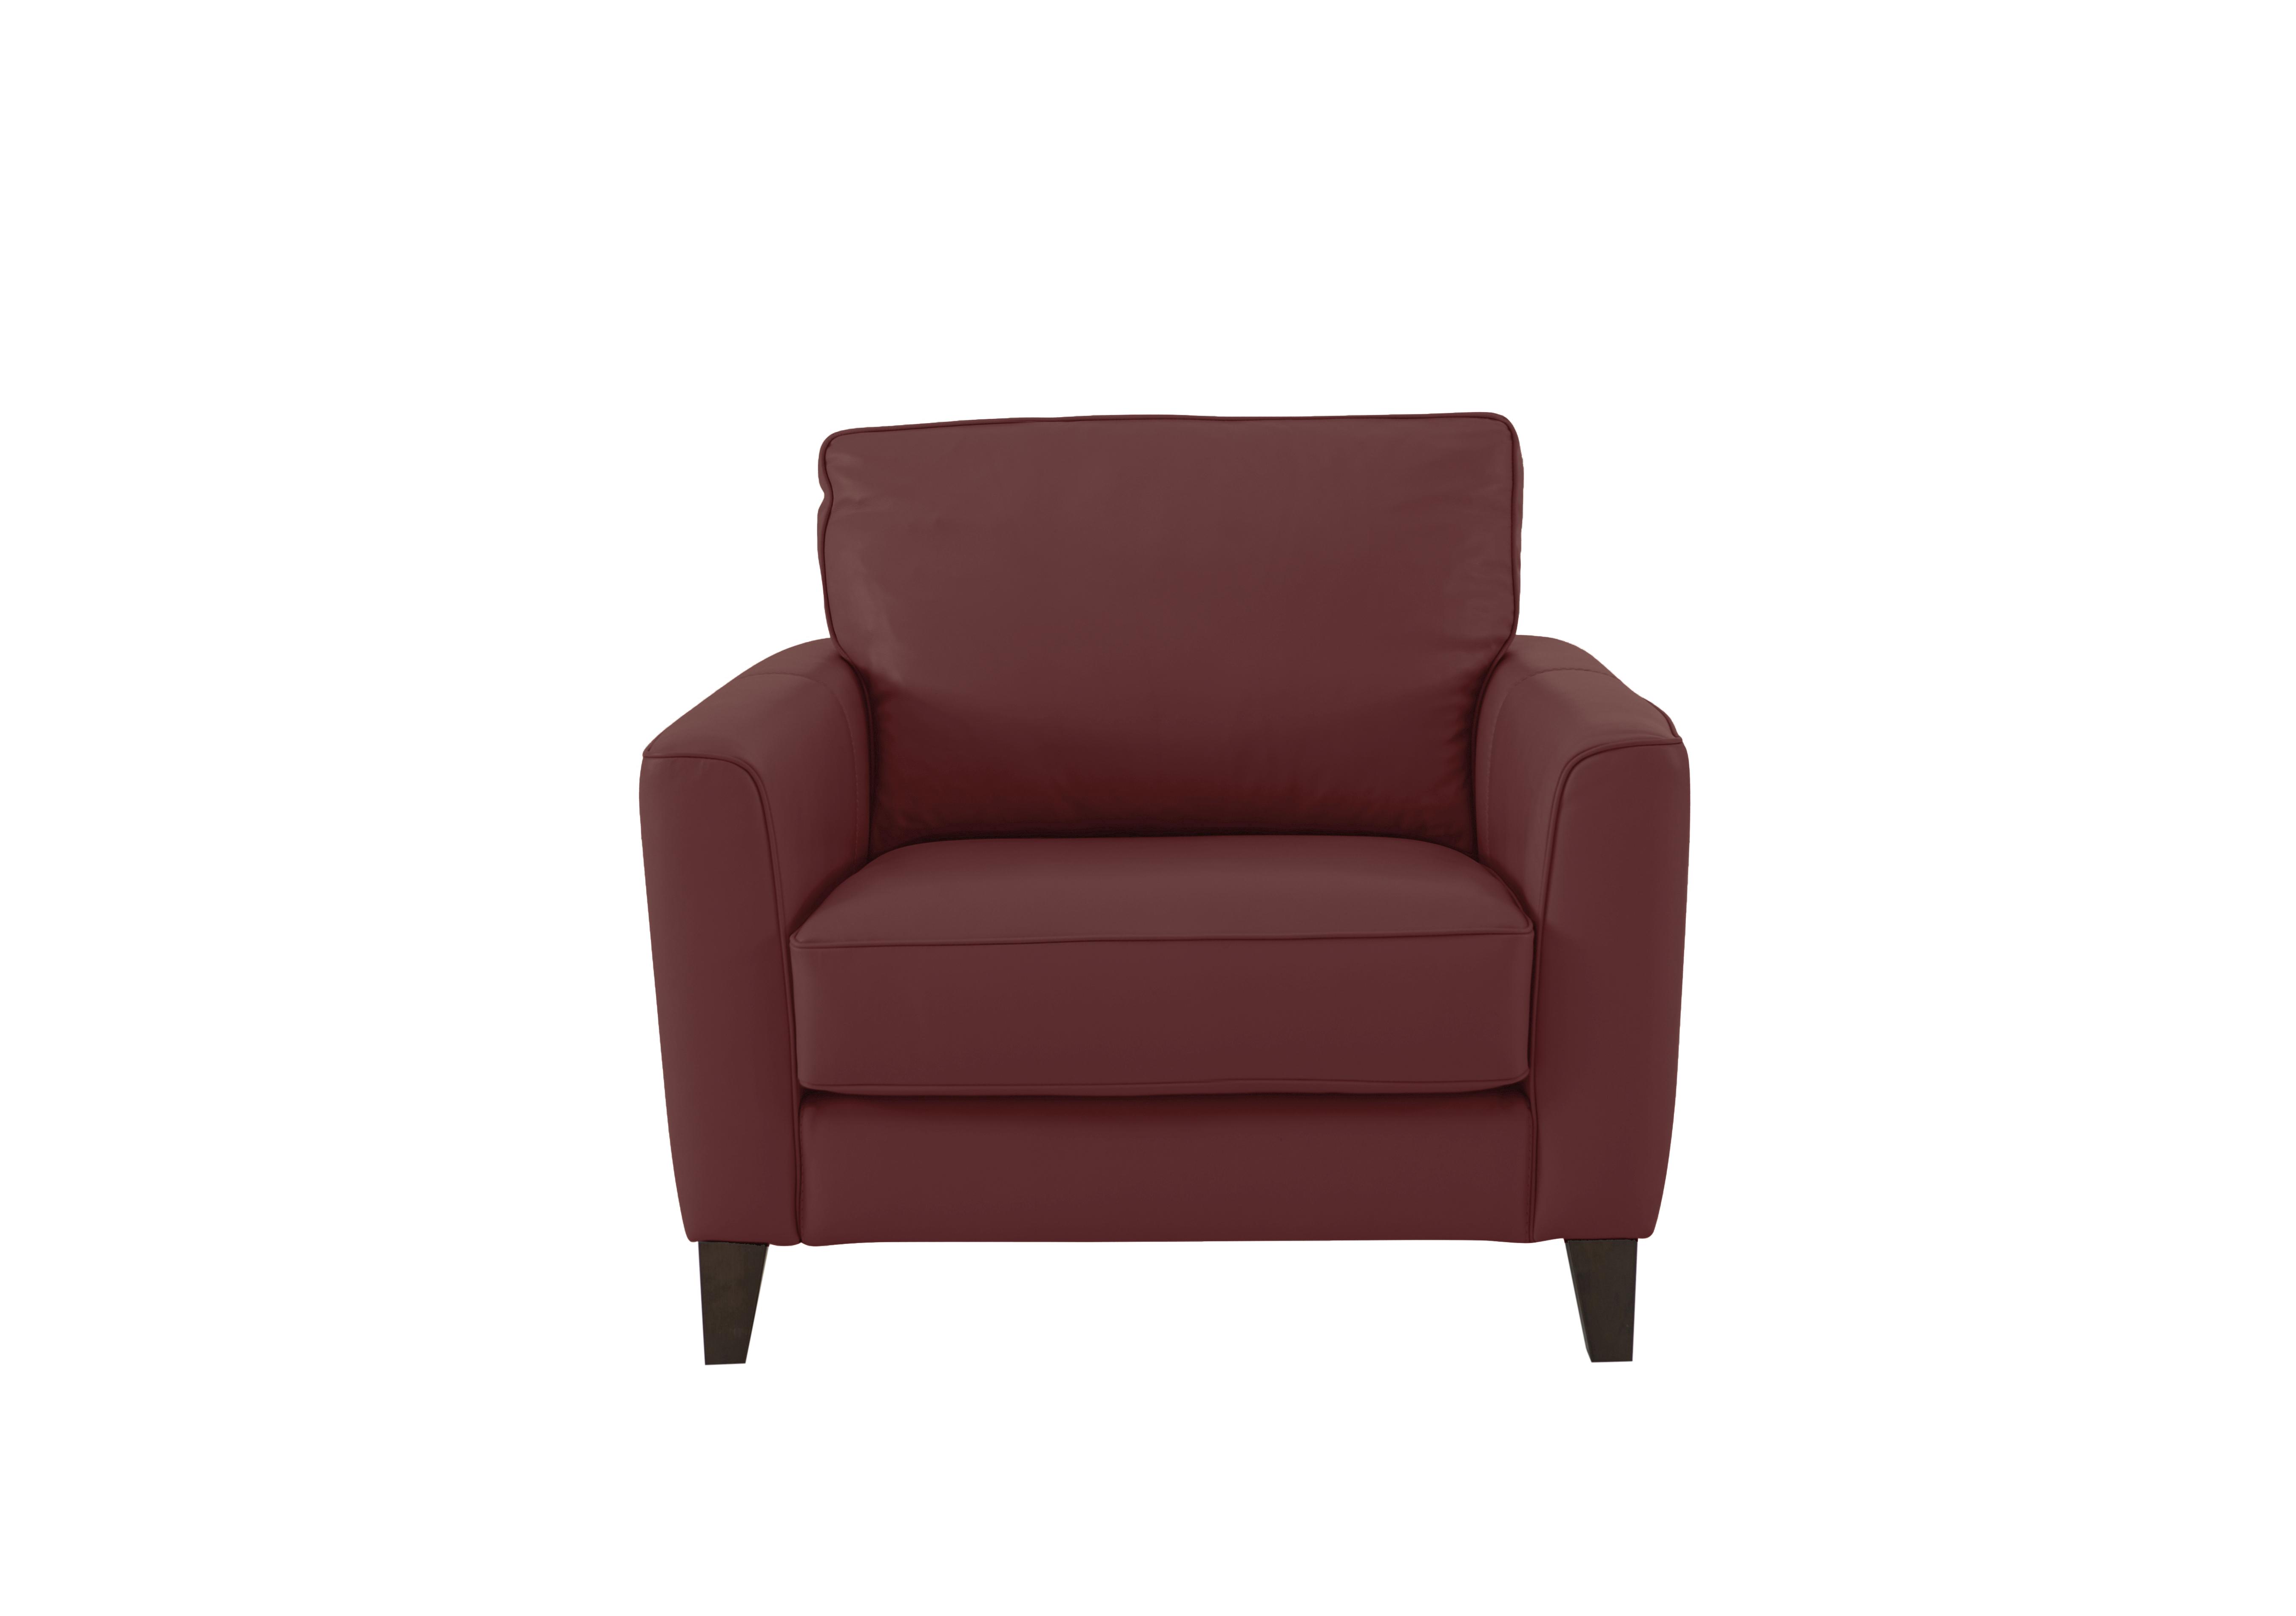 Brondby Leather Armchair in Bv-035c Deep Red on Furniture Village